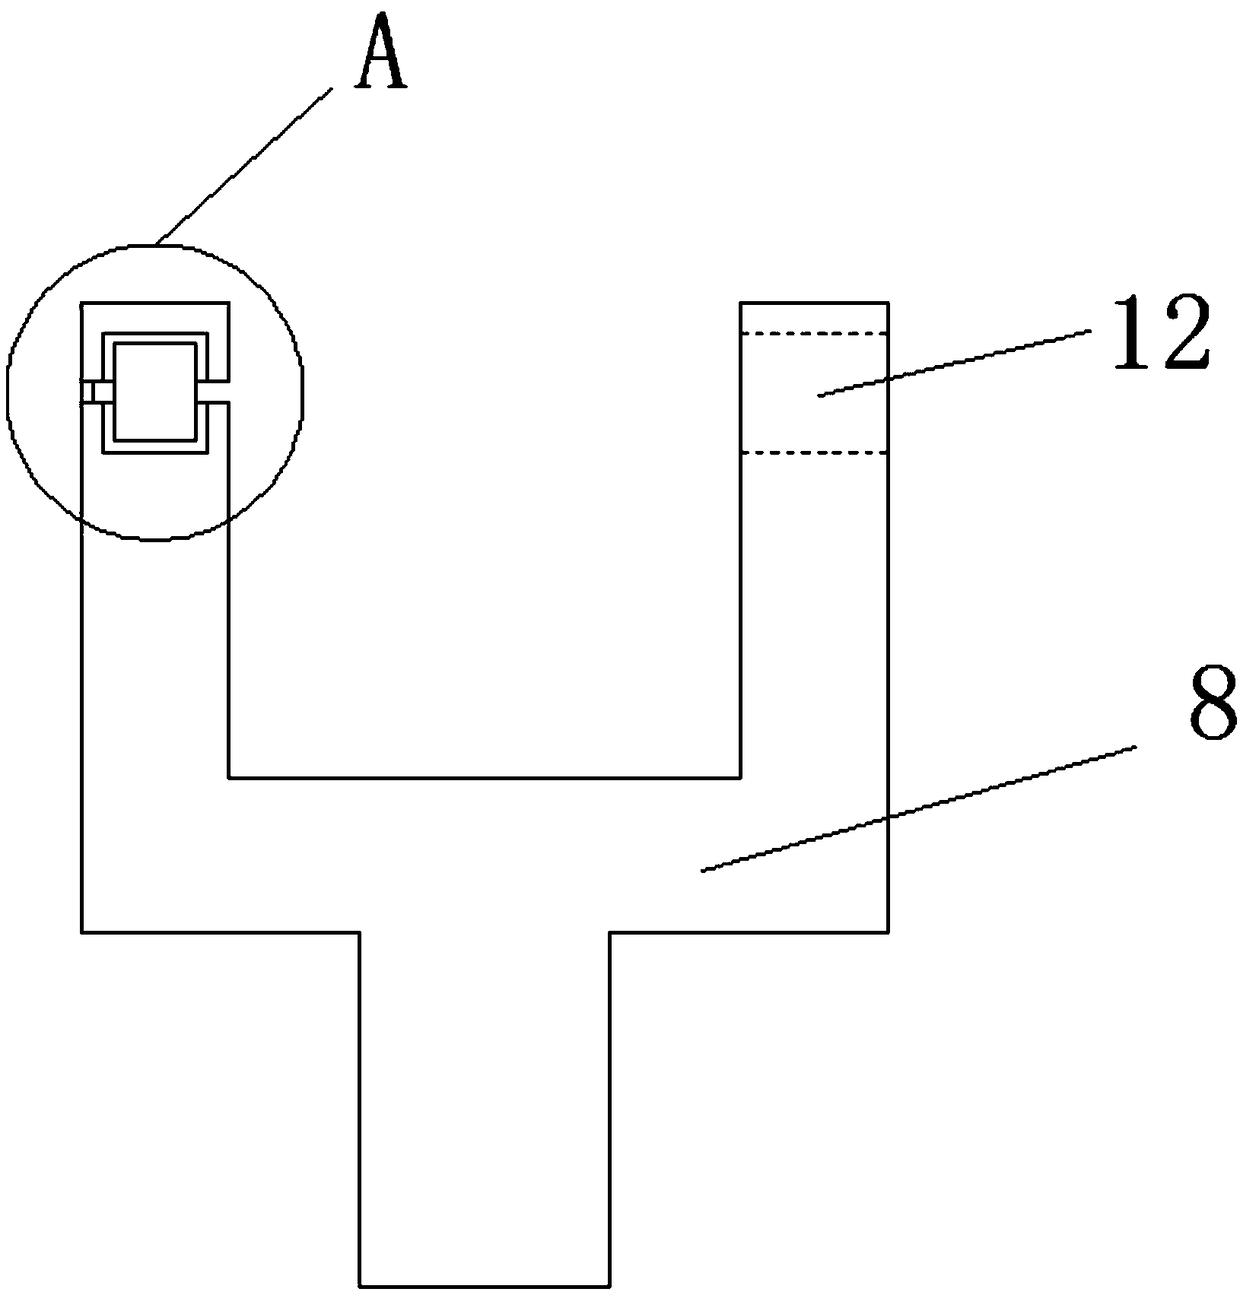 Textile yarn guiding device with humidifying device